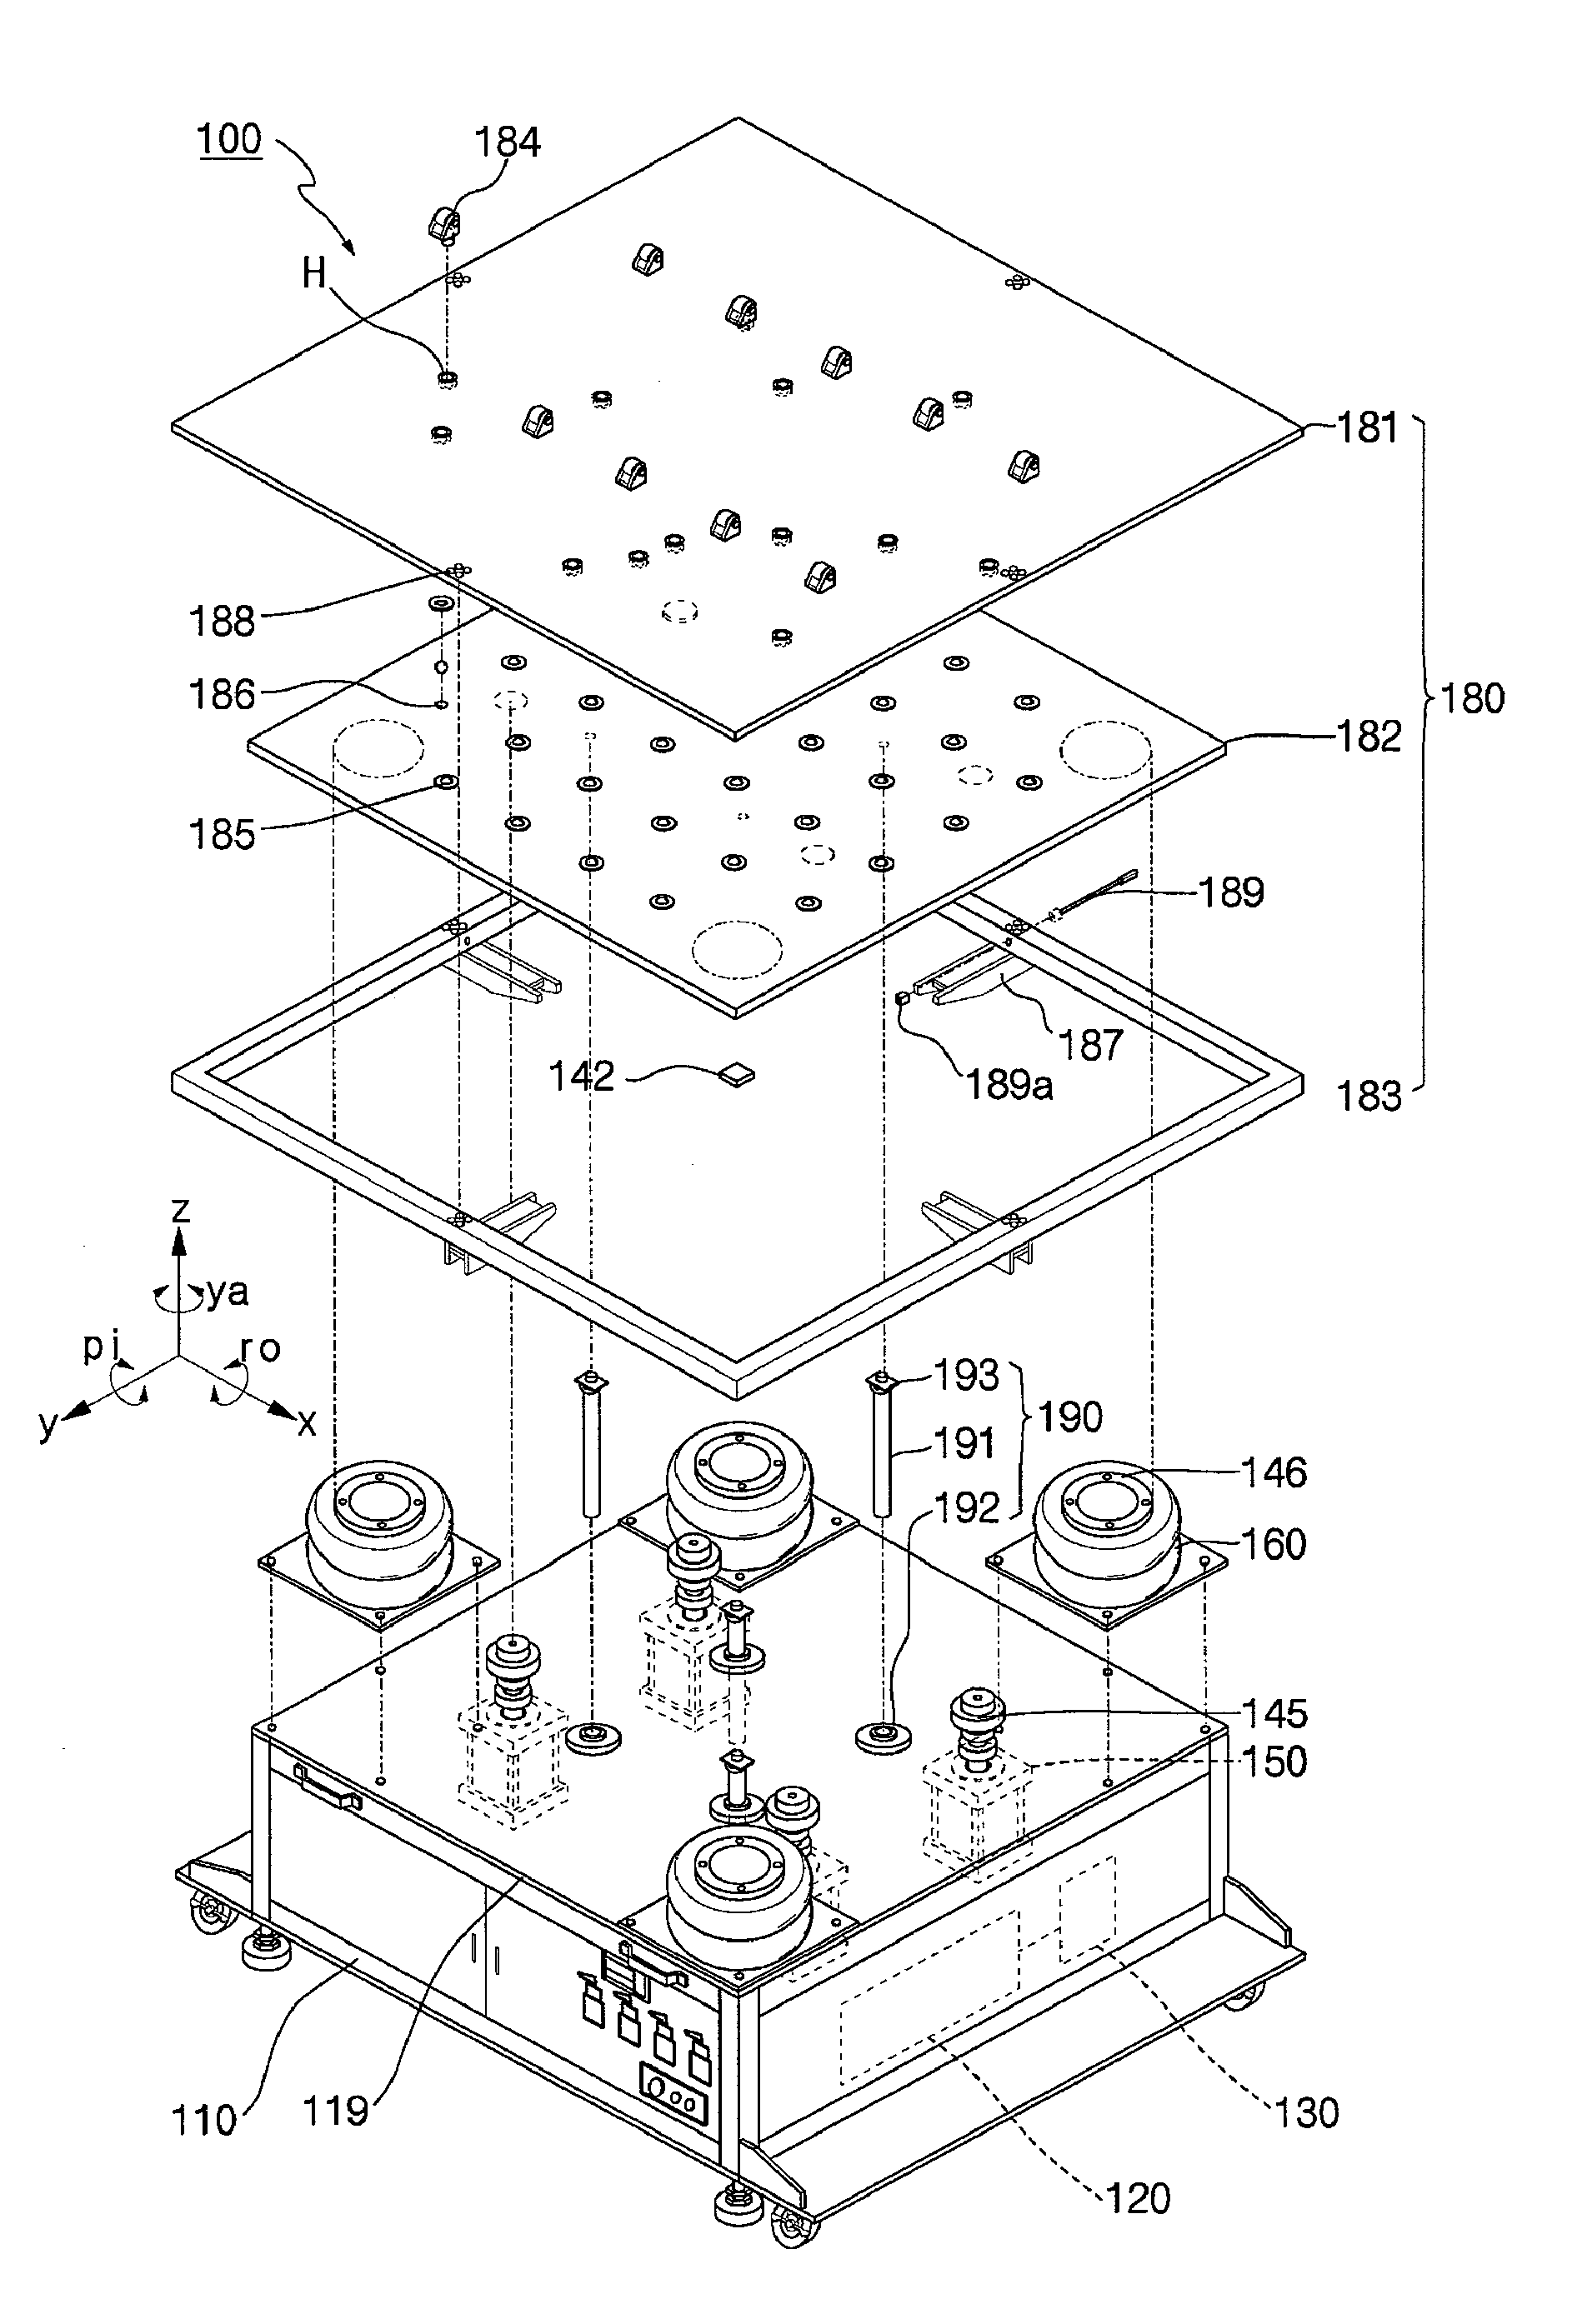 Weight balancer and pipe joining method